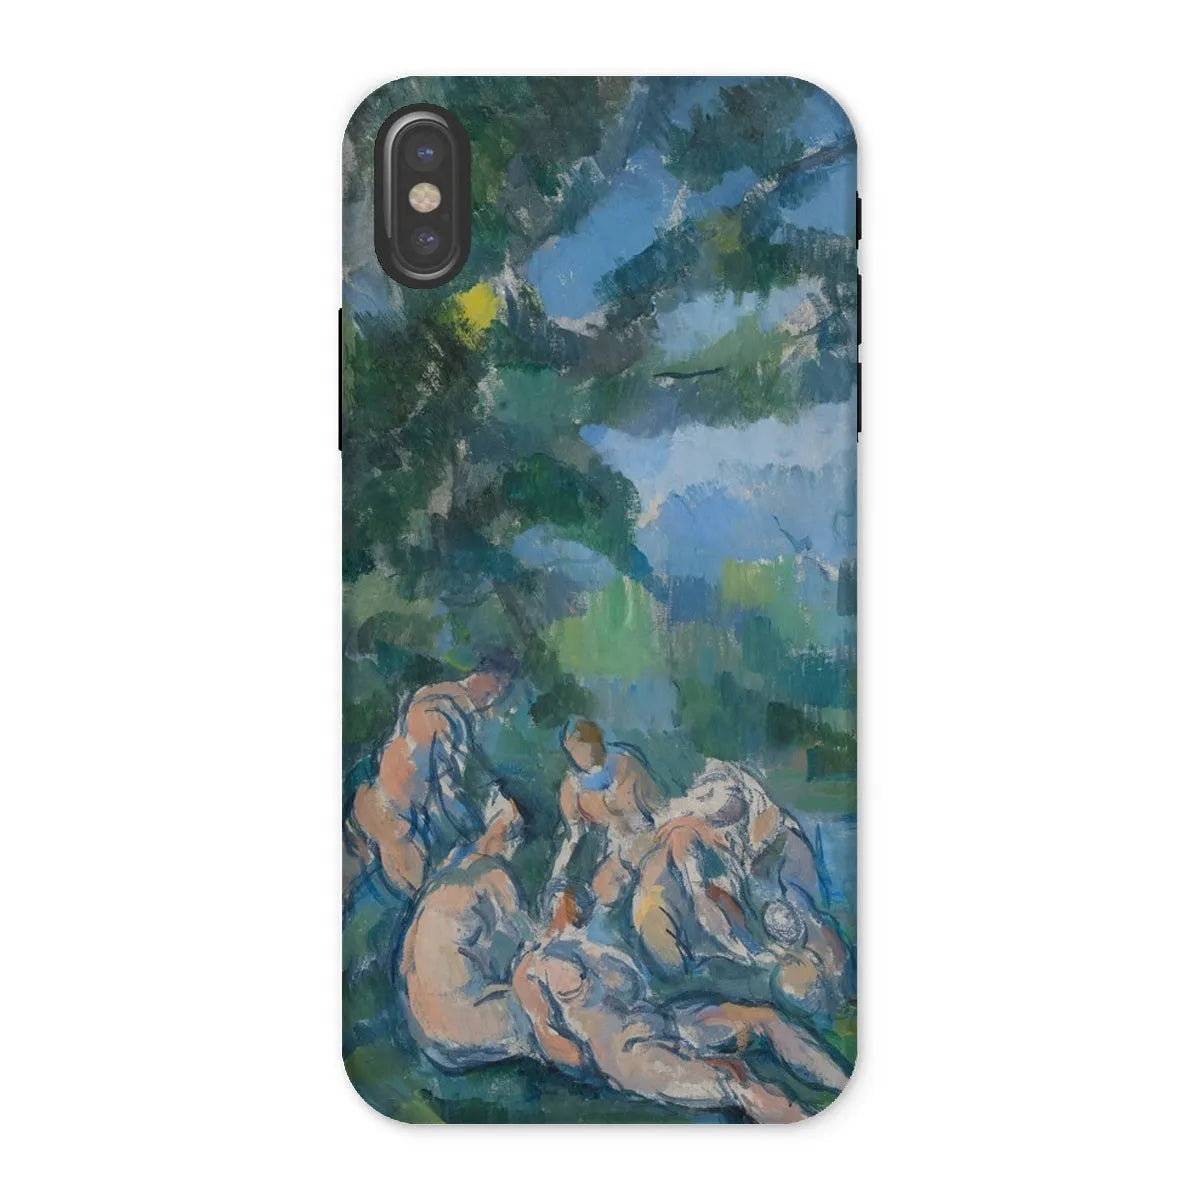 The Bathers - Post-impressionism Phone Case - Paul Cezanne - Iphone x / Matte - Mobile Phone Cases - Aesthetic Art